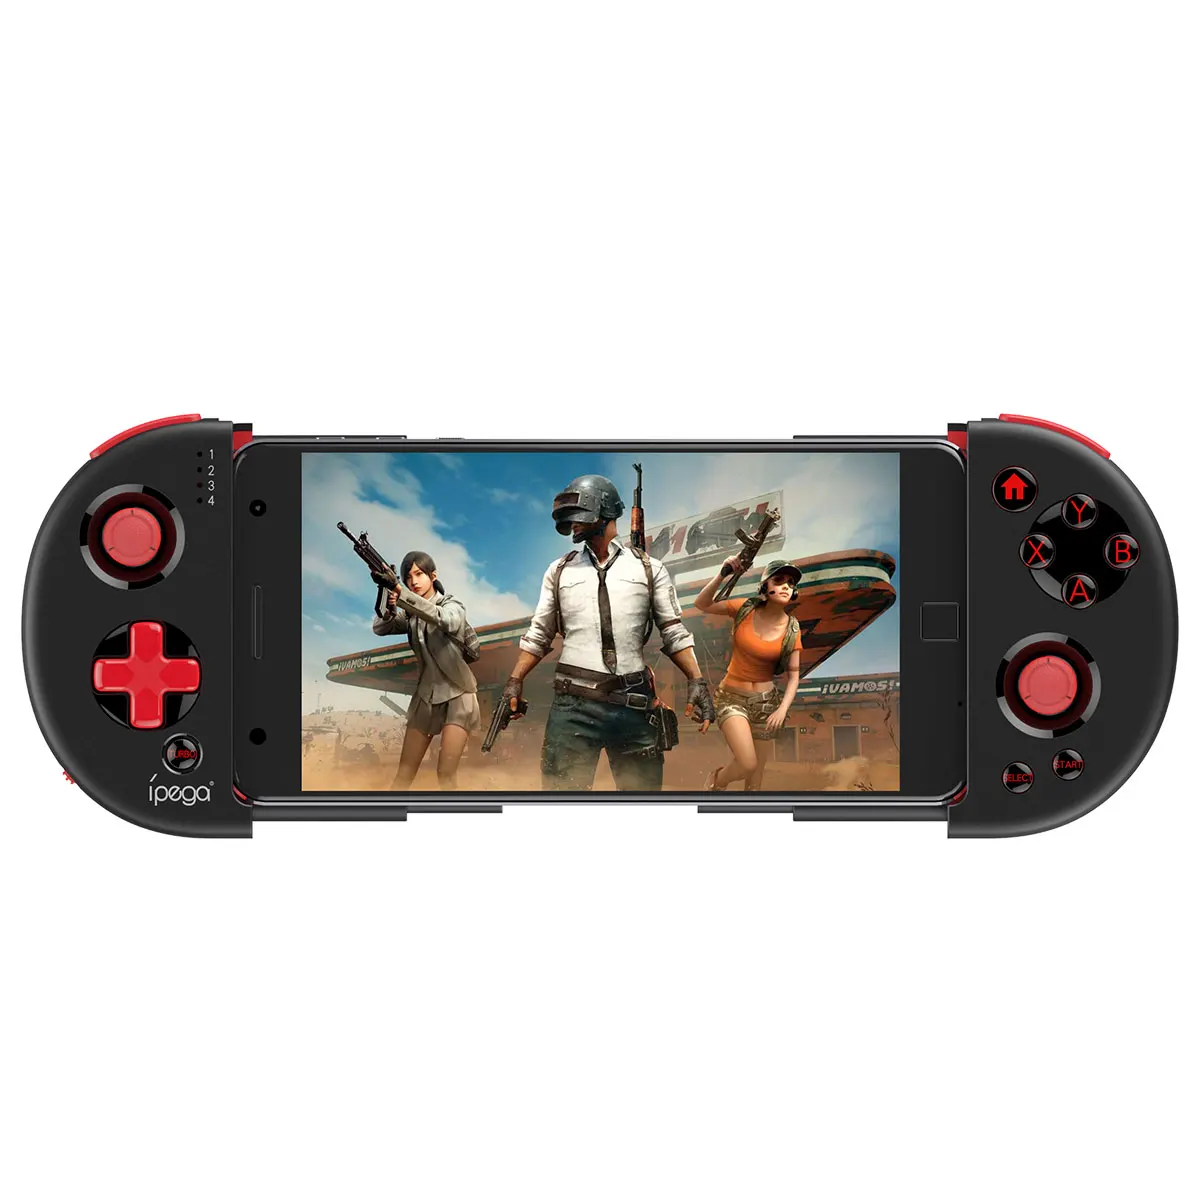 uitvinden Trappenhuis Inloggegevens Smartphone Gamepad Mobile Controller Android Wireles Gamepad - Buy Gamepad,Smartphone  Gamepad,Wireless Gamepad Product on Alibaba.com